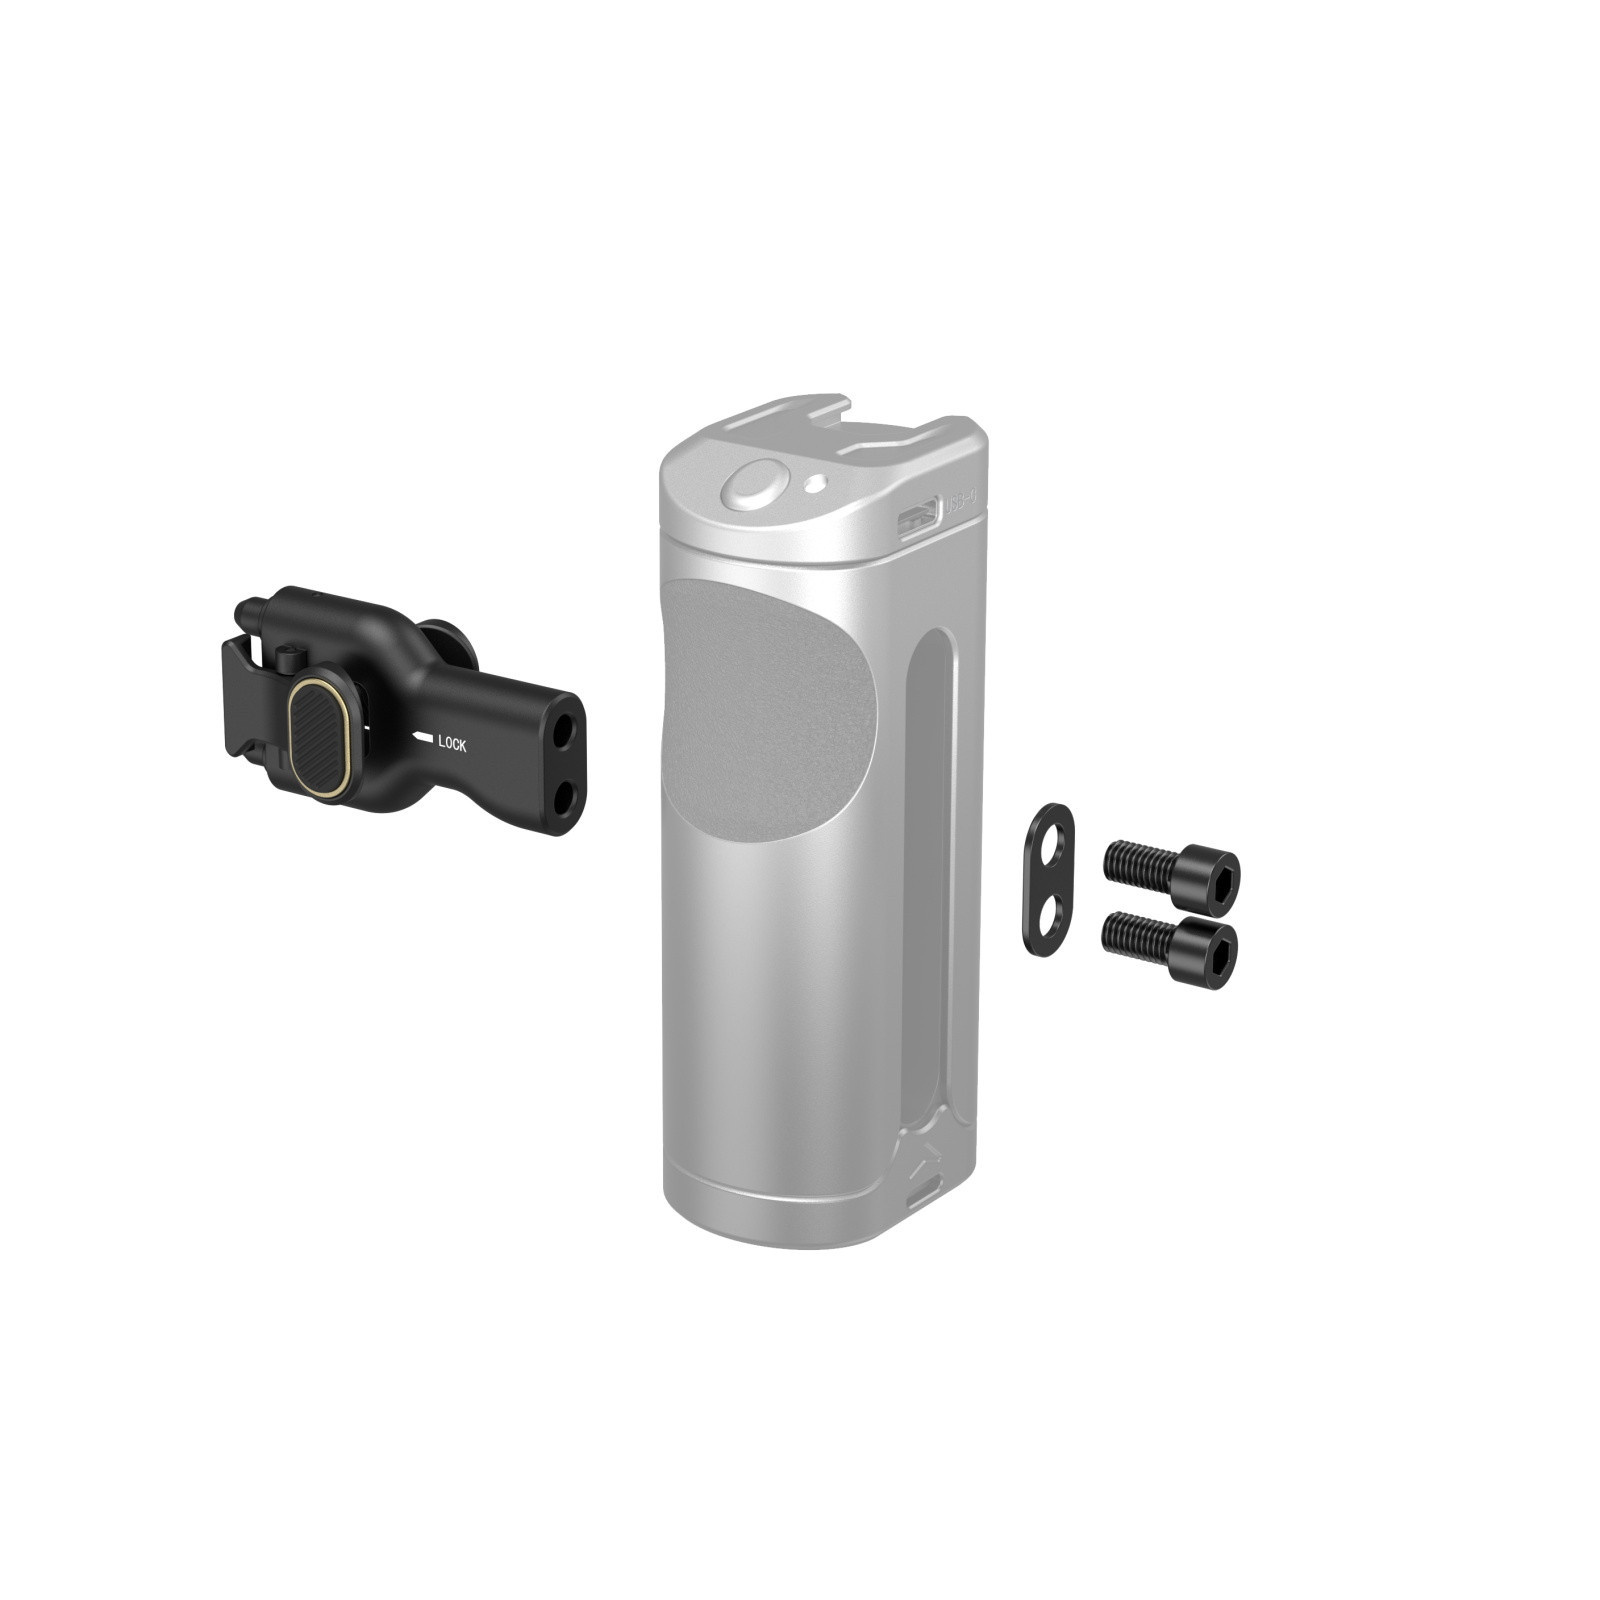 SmallRig 4404 Side Handle Quick Release Adapter